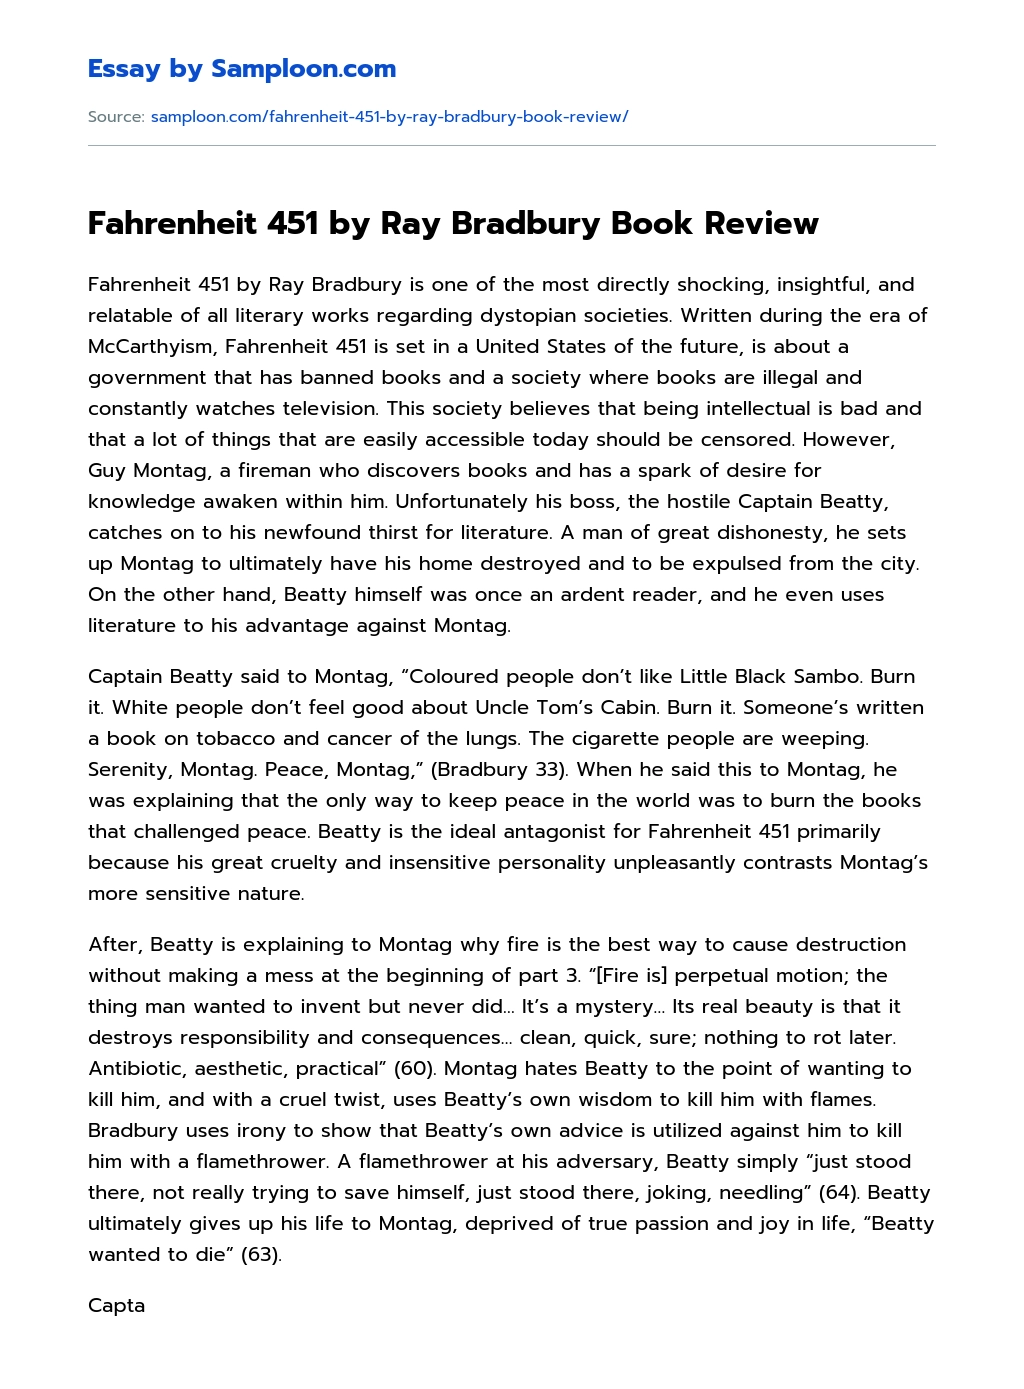 What problems of society are raised in the book “Fahrenheit 451” by Ray Bradbury essay